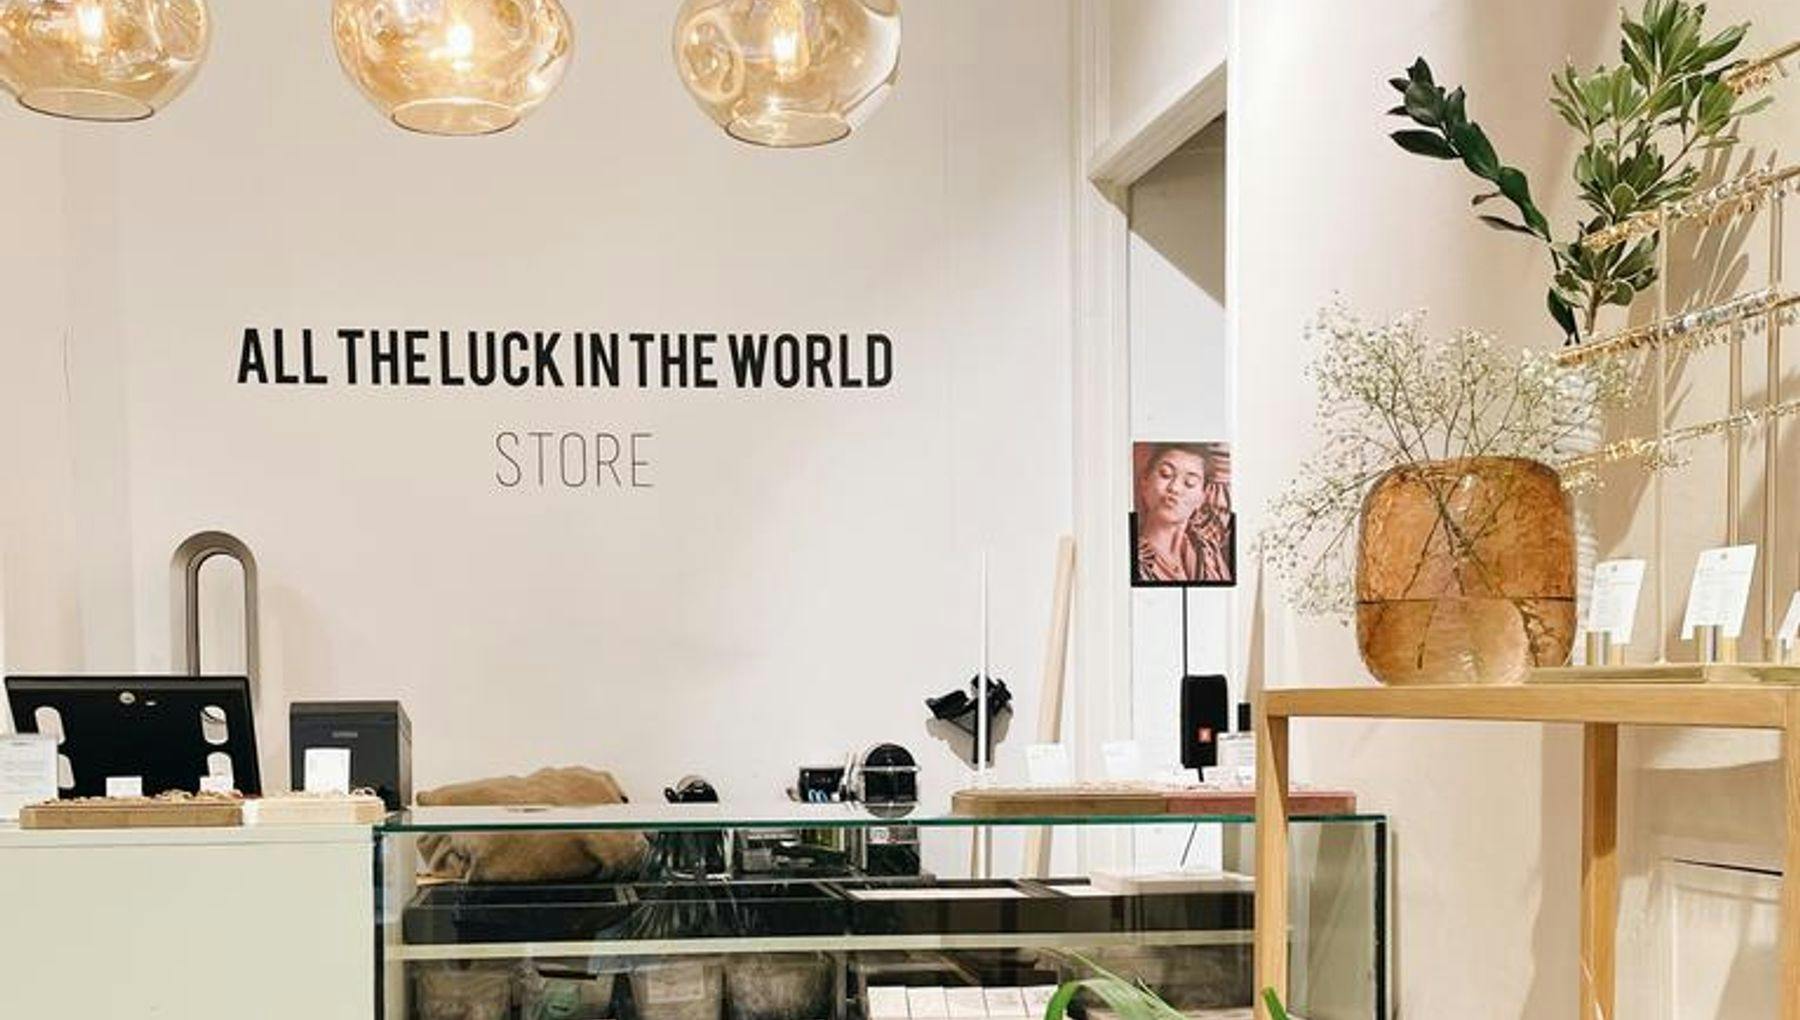 All the luck in the world store Amsterdam Zuid, interior